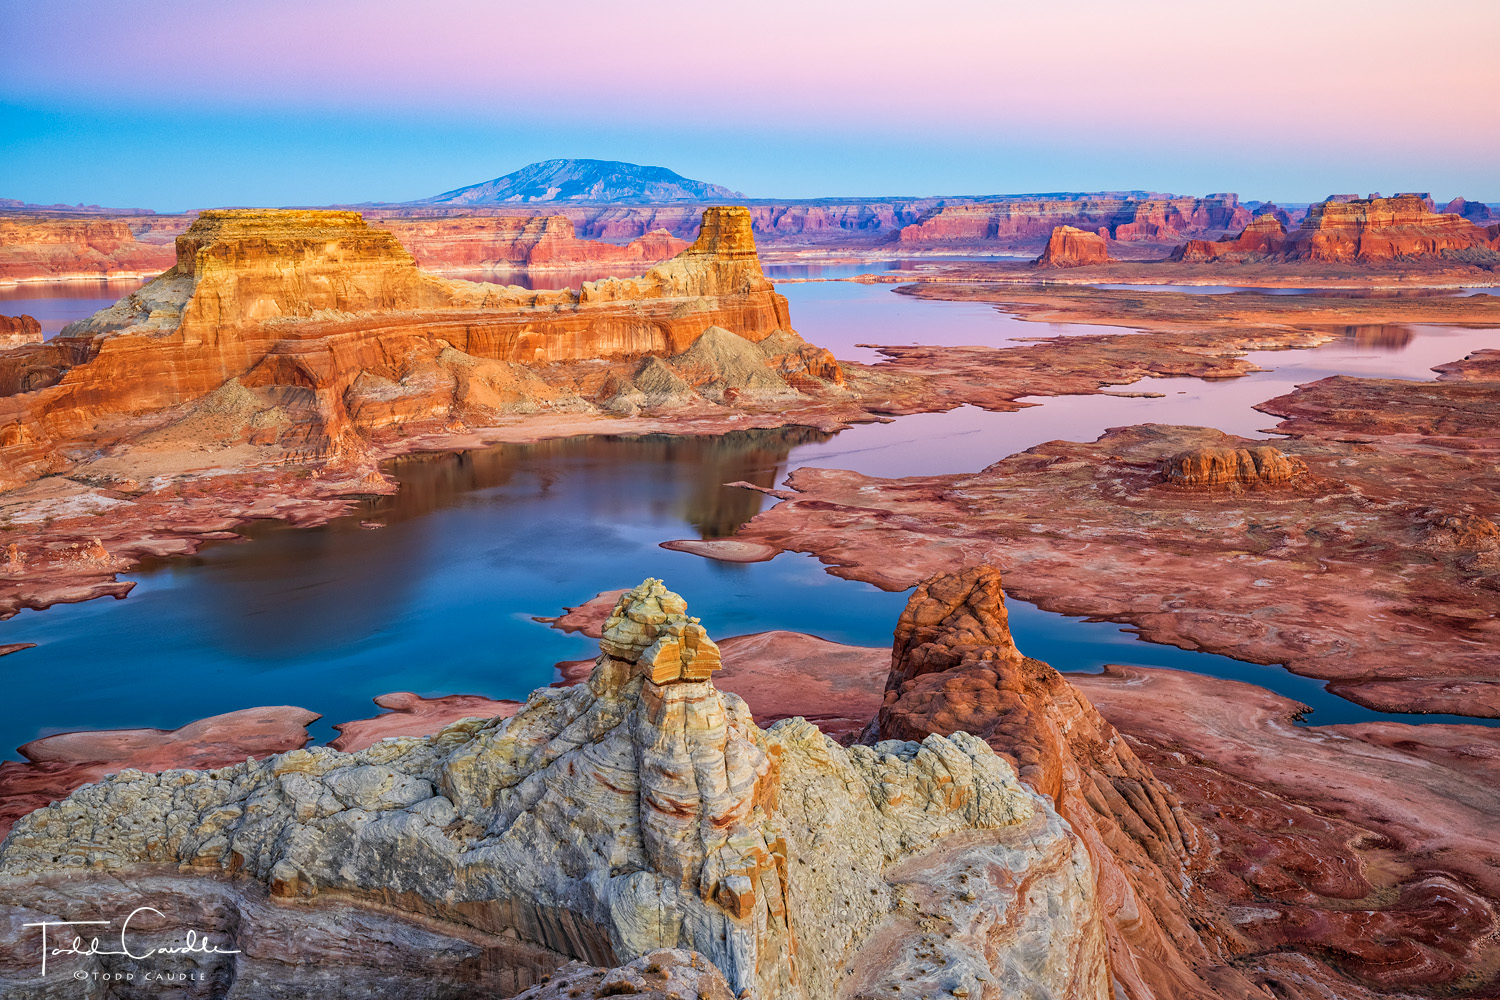 Gunsight Butte rises from the dark waters of Lake Powell as the Earth's shadow climbs skyward just after sunset.